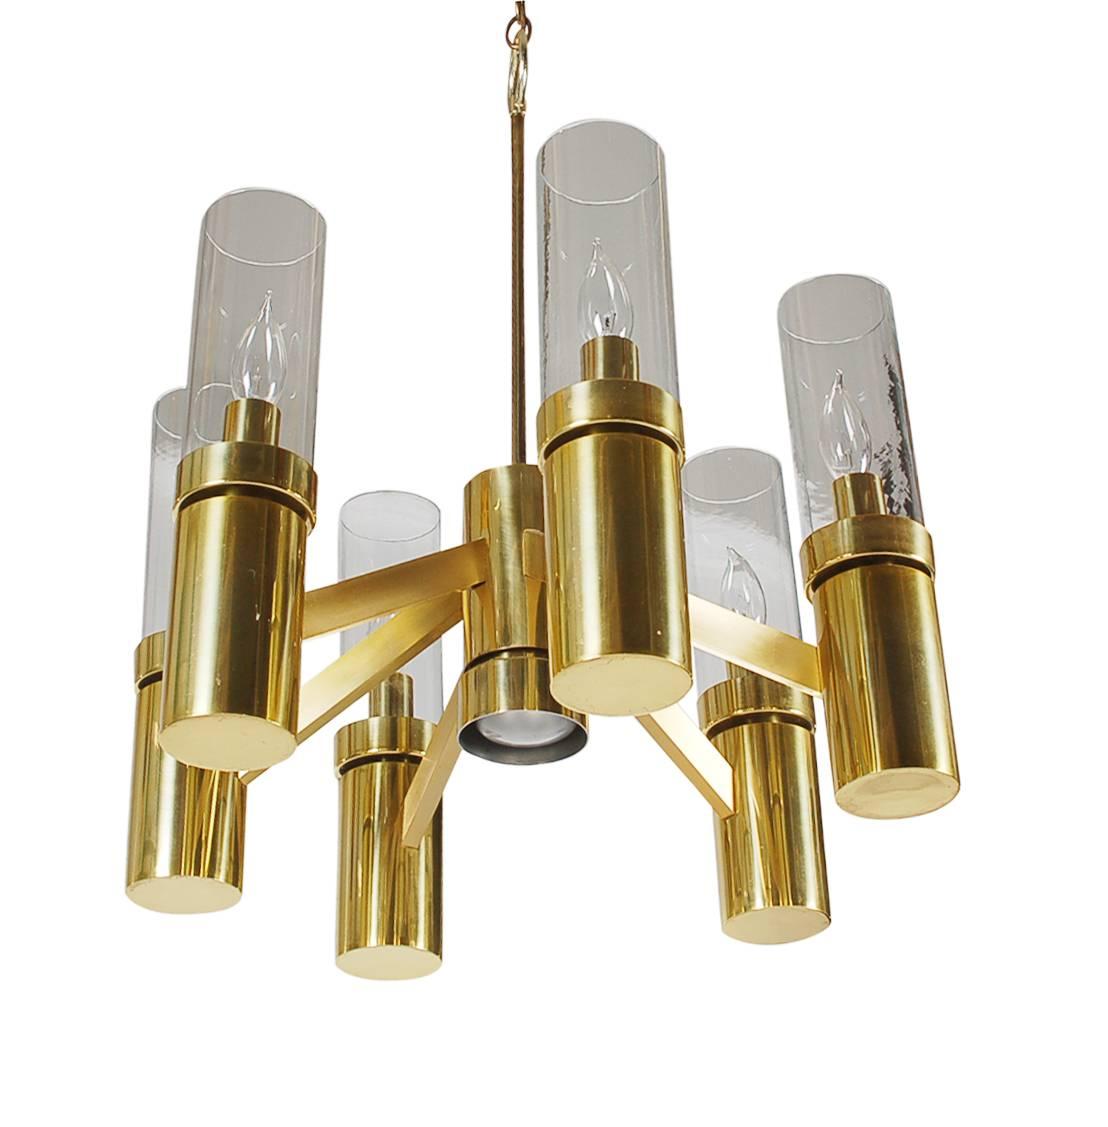 A beautiful modern design by Gaetano Sciolari for Lightolier Lighting Company. It features a brass plated frame with six hurricane glass tube shades.